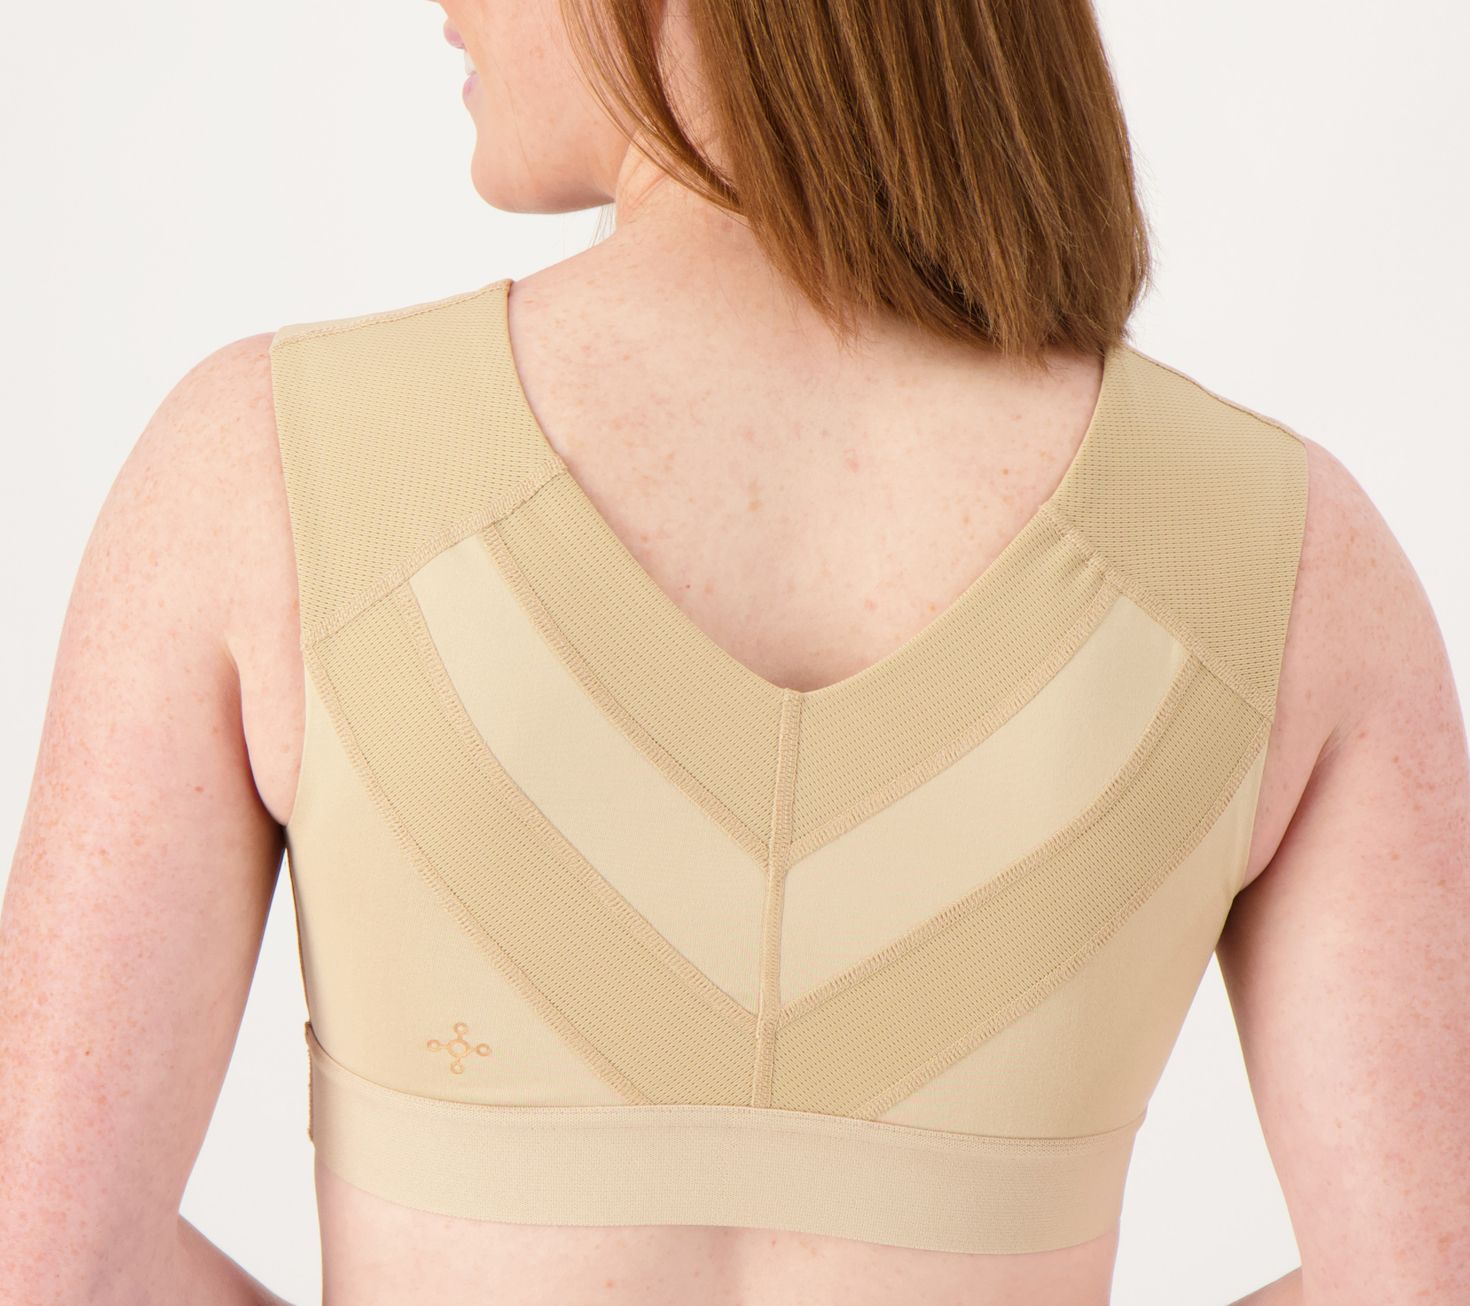 Copper Life by Tommie Copper Women's Shoulder Support Sh 